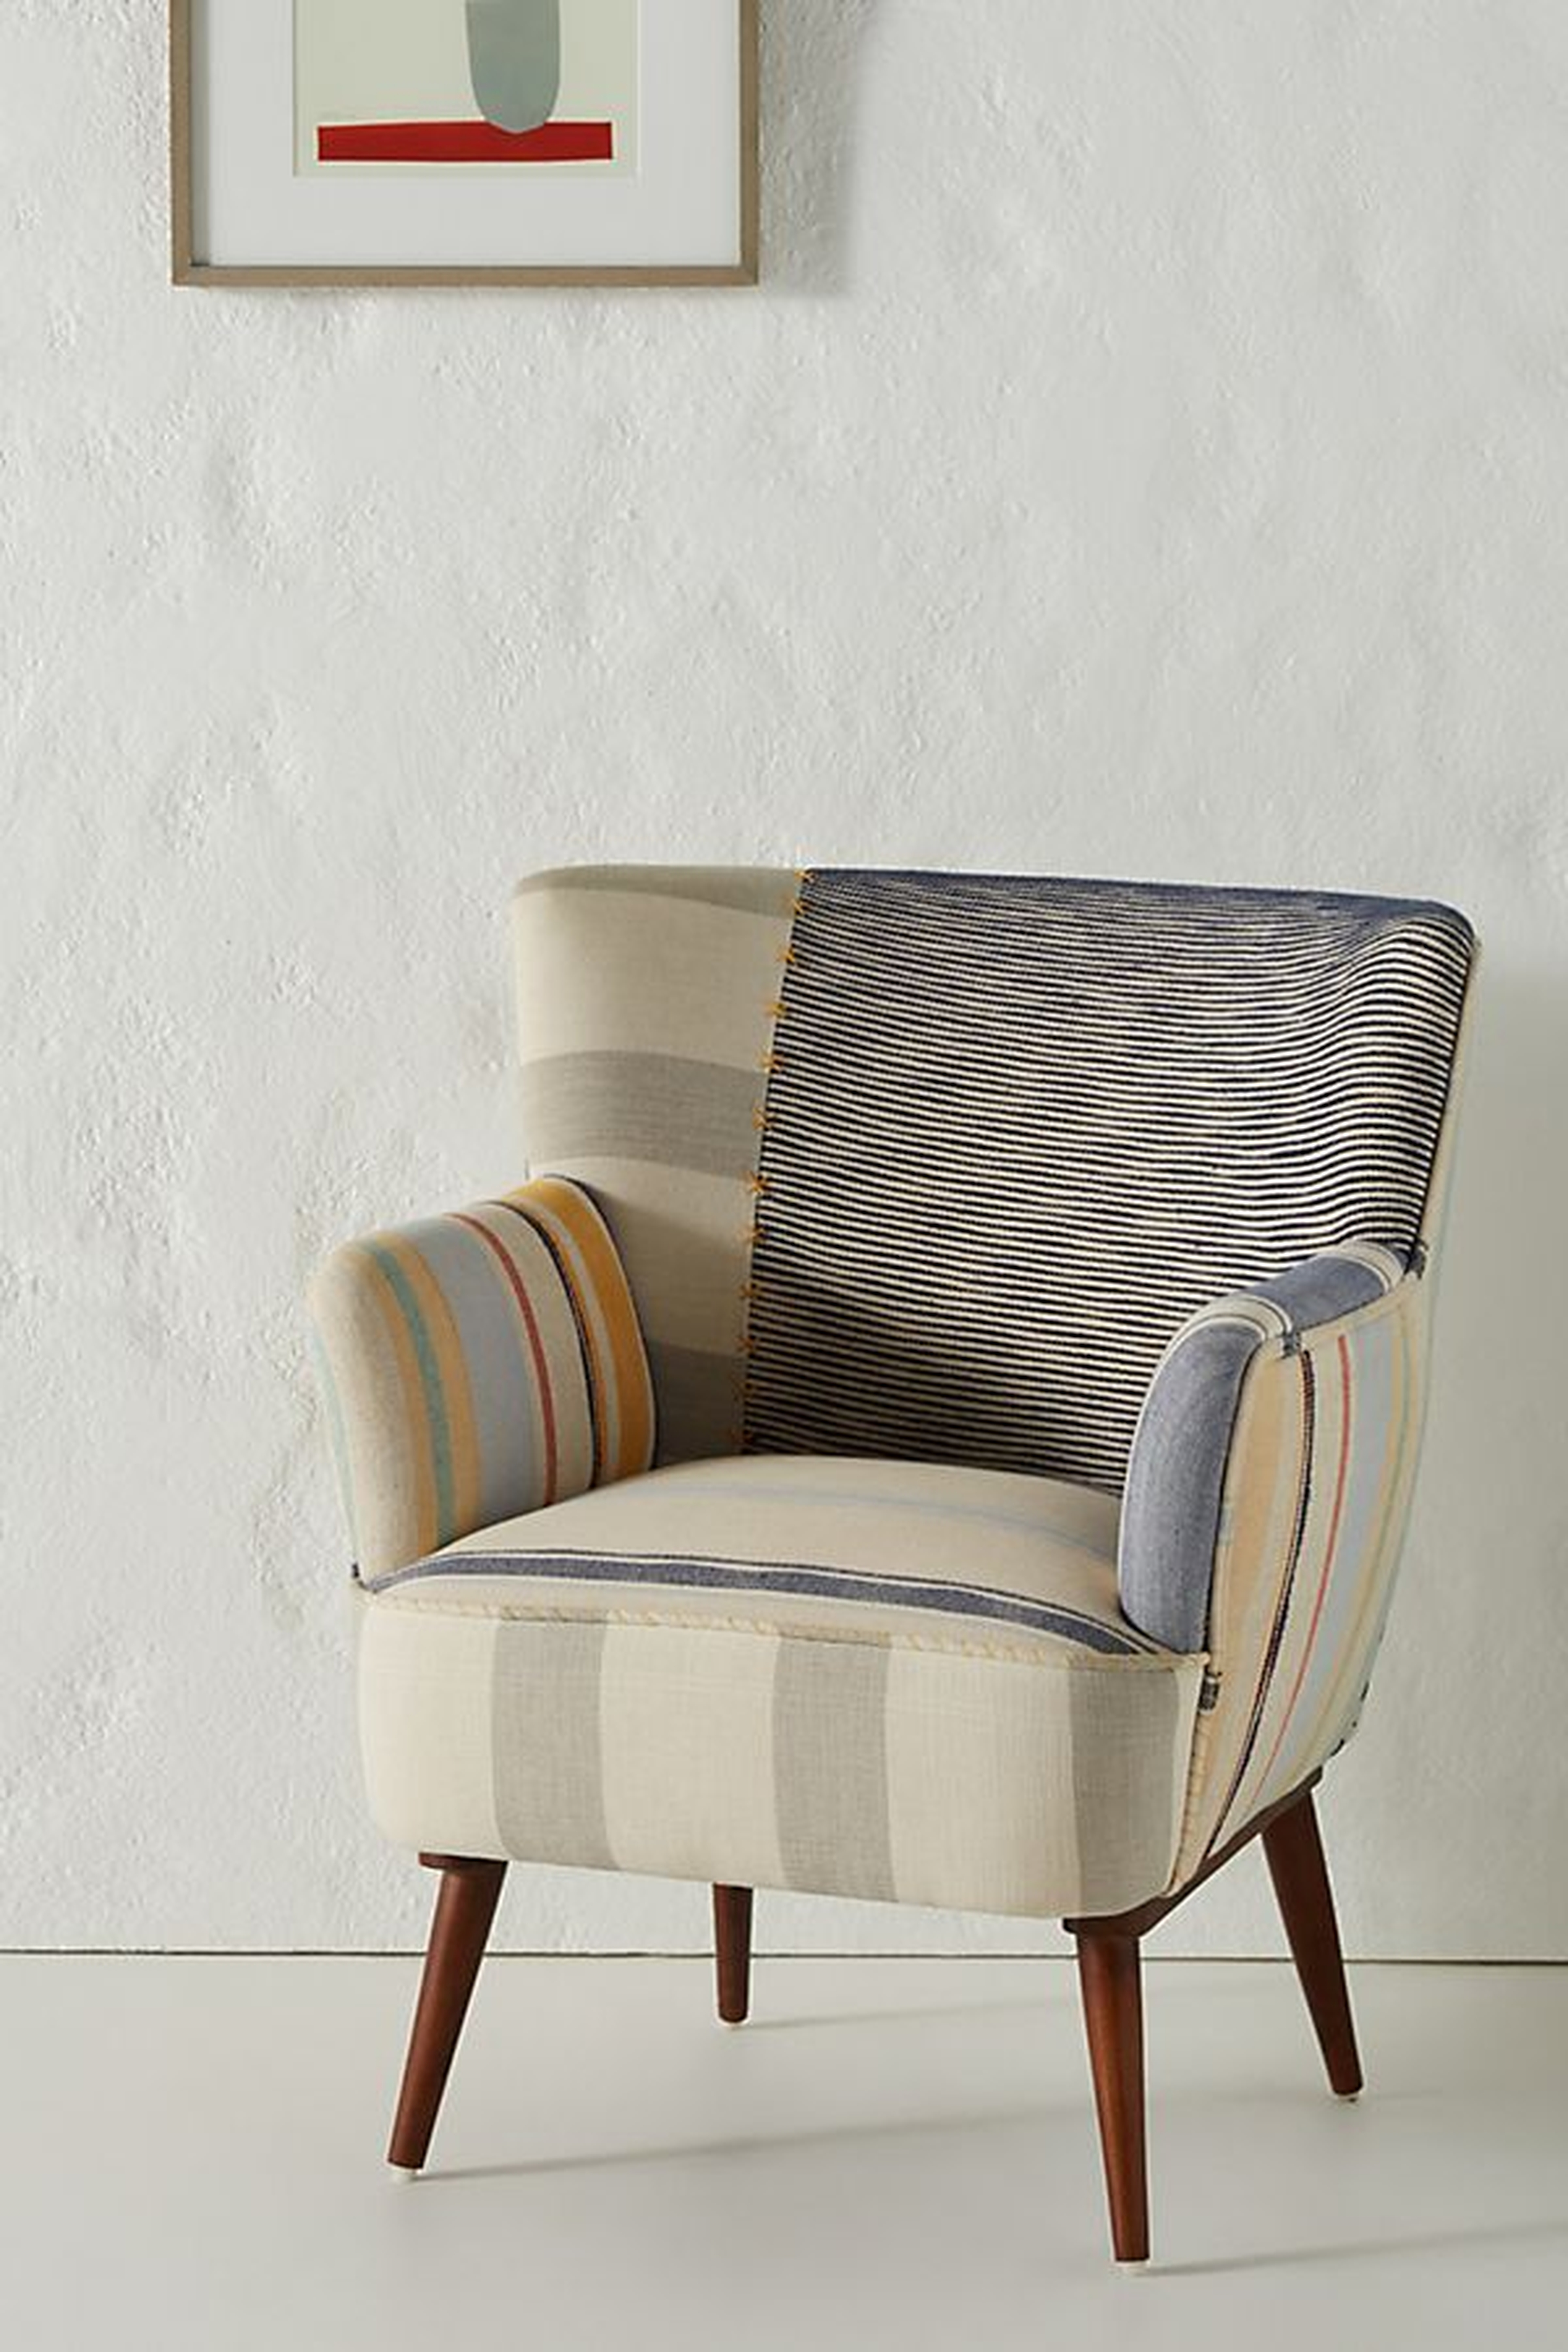 Striped Petite Accent Chair - Anthropologie